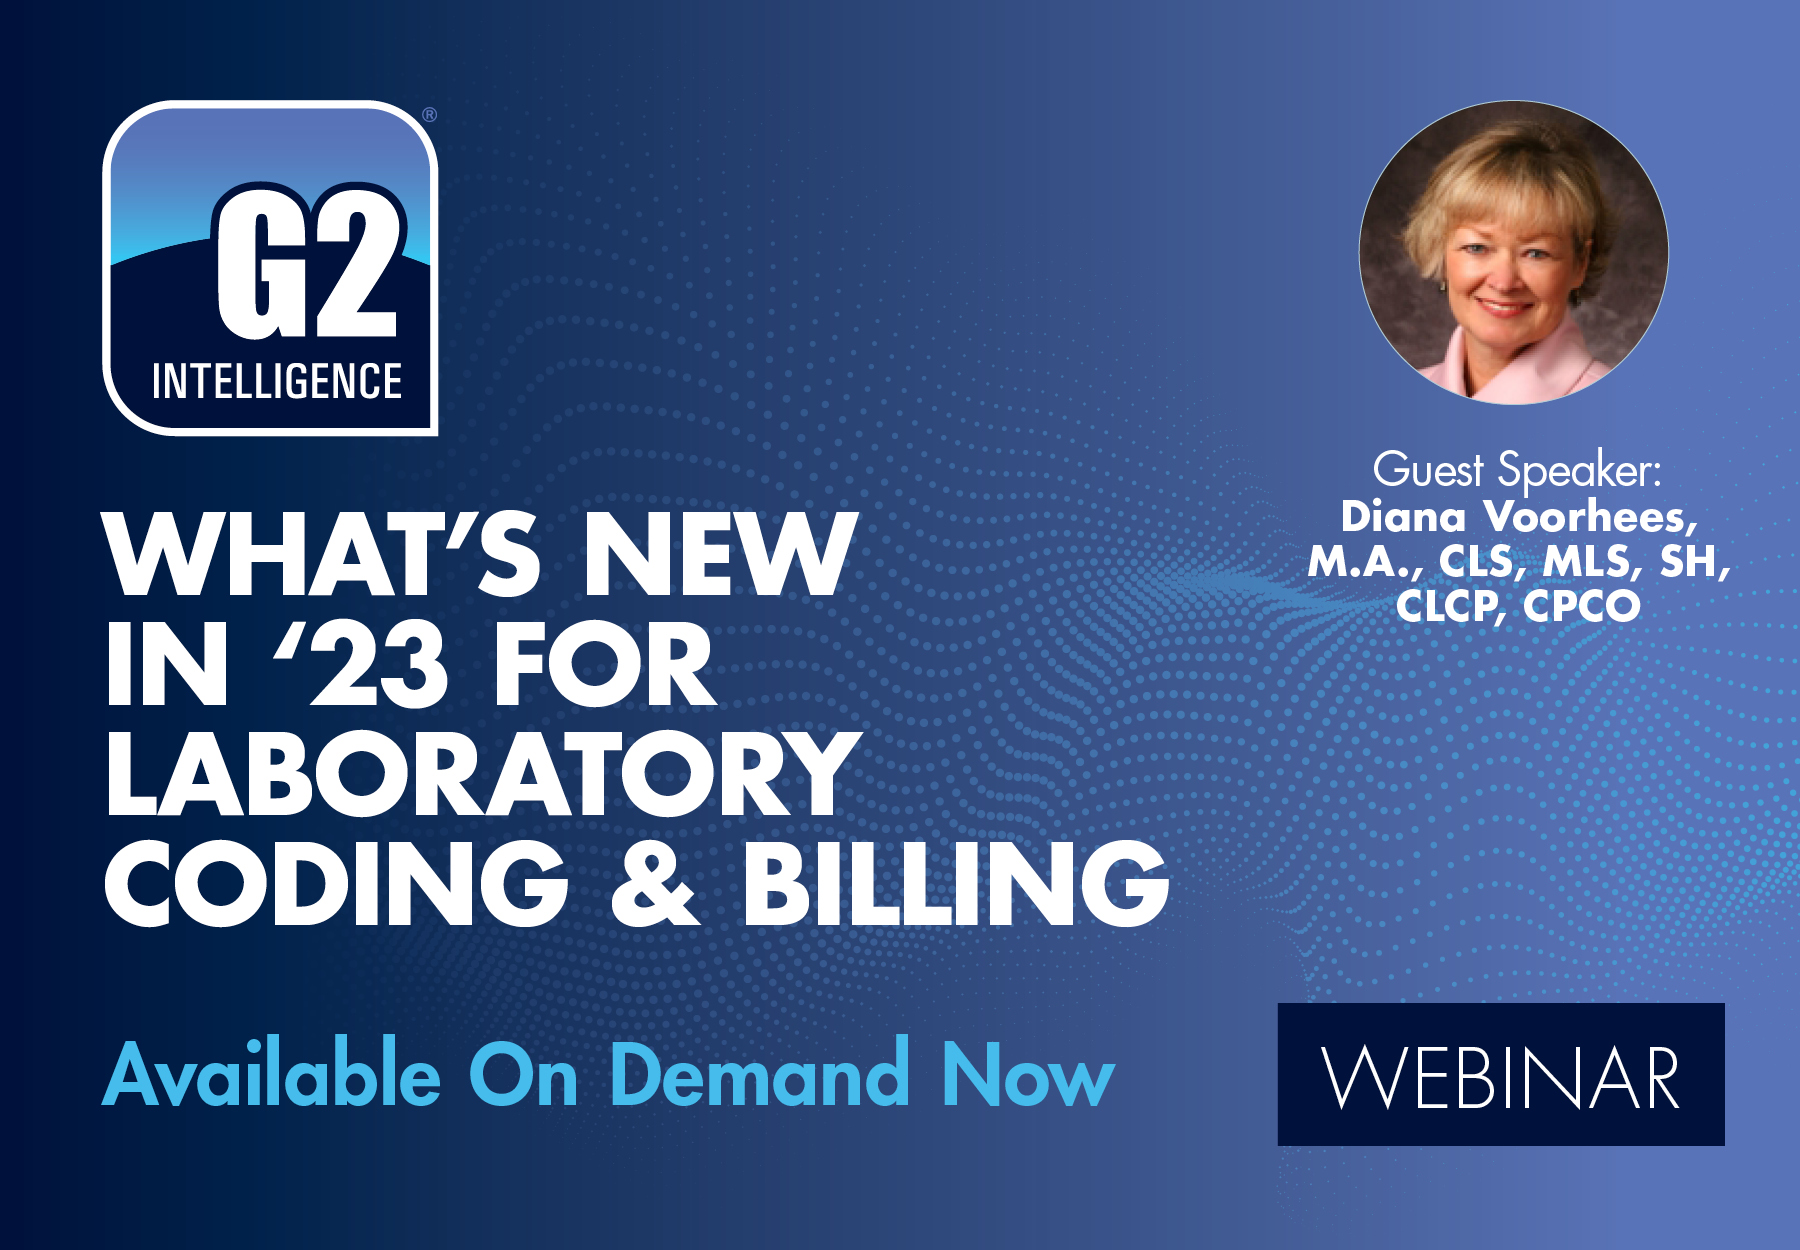 A blue and white banner promoting the On-Demand version of G2 Intelligence's 